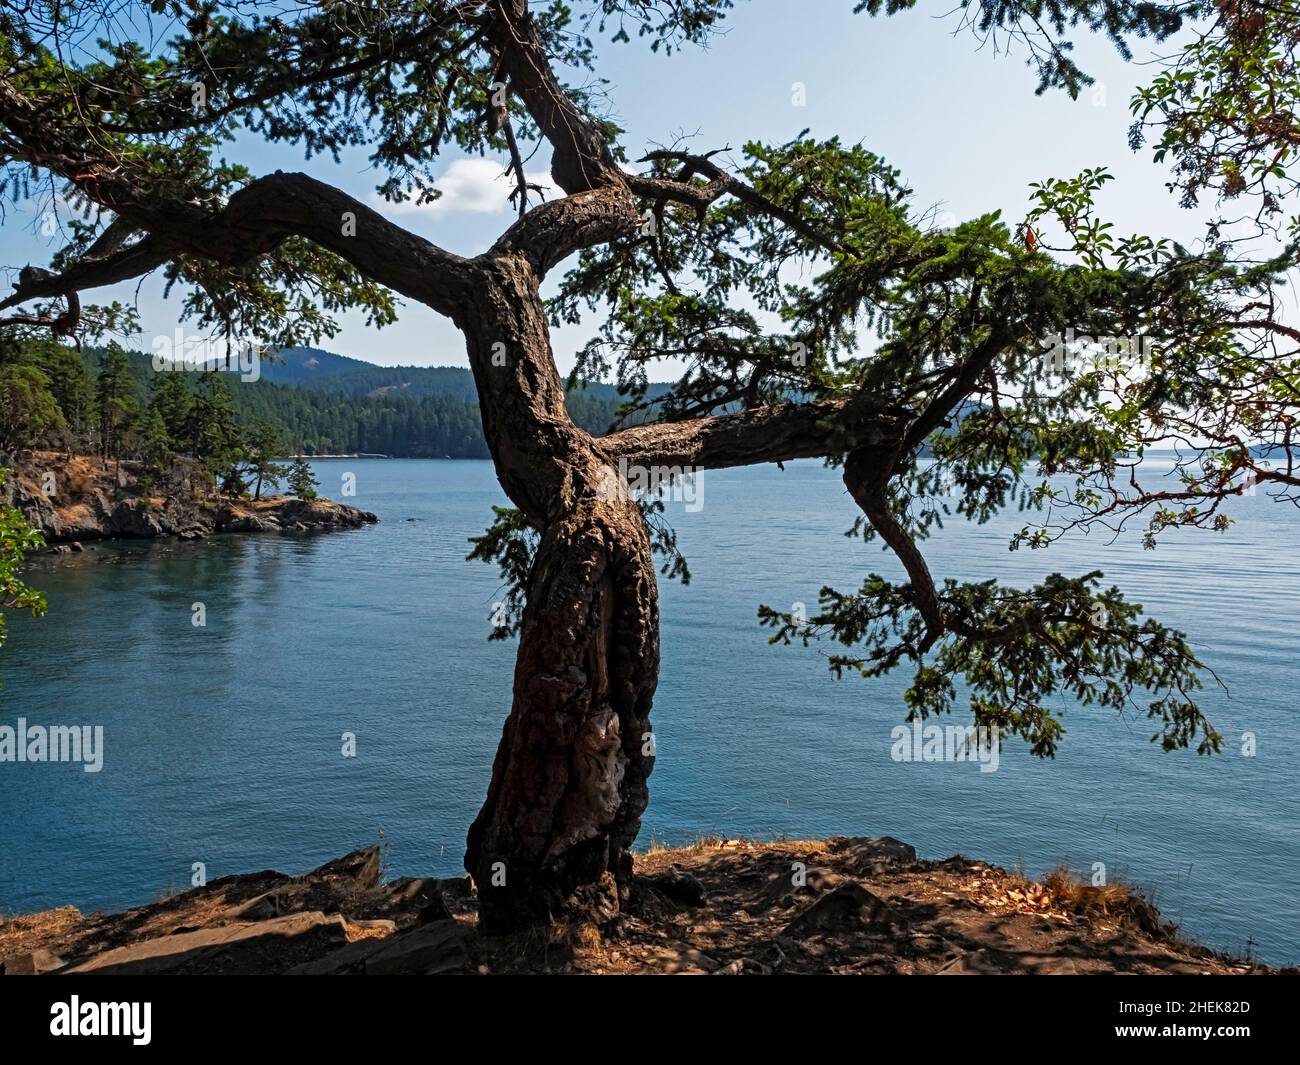 WA21045-00...WASHINGTON - Weathered tree on rocky point at Obstruction Pass Park on Orcas Island; one of the San Juan Islands. Stock Photo